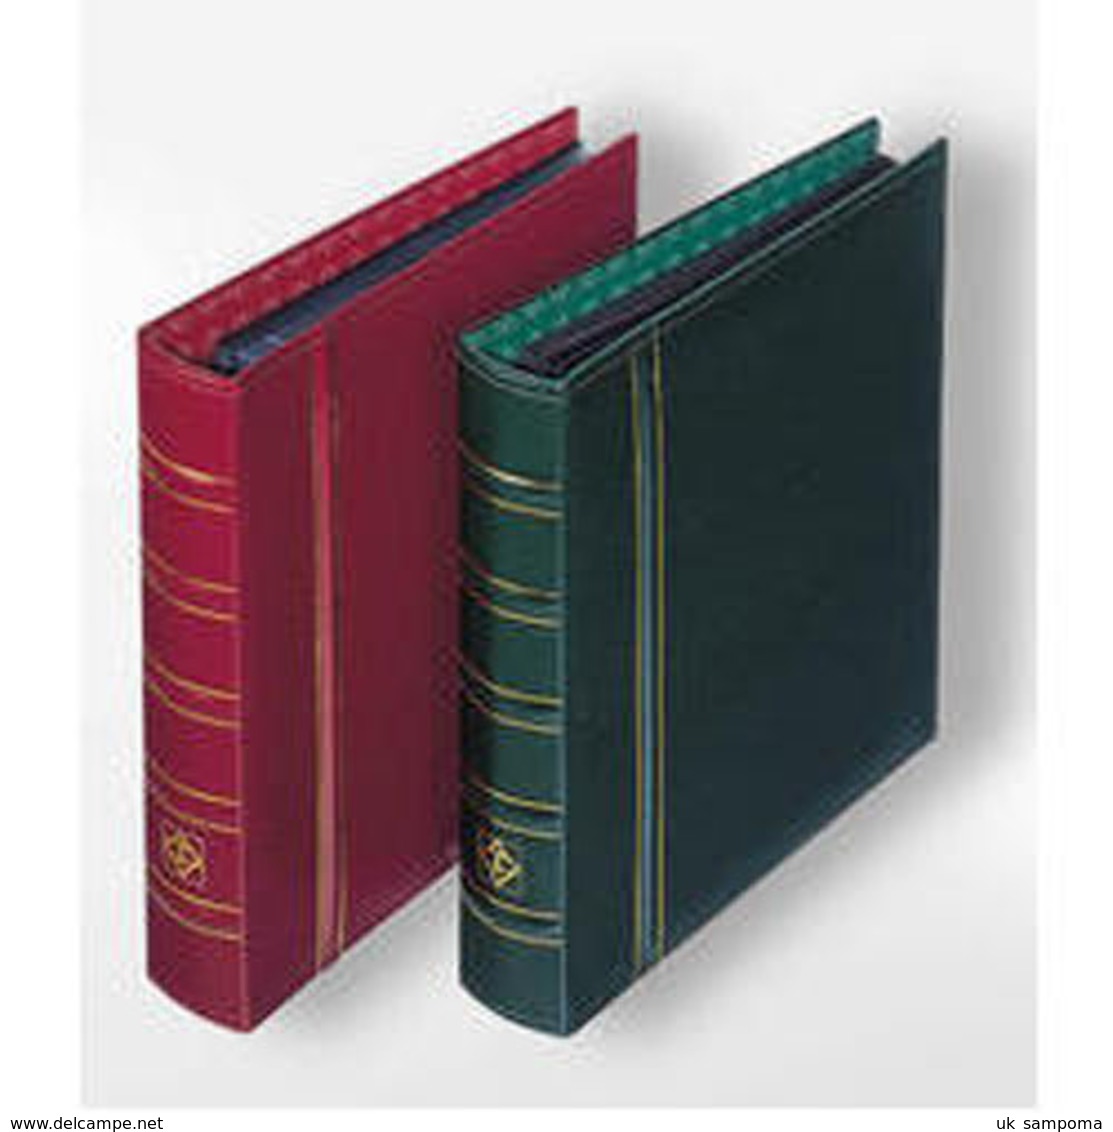 Ringbinder OPTIMA, In Classic Design, Red - Large Format, Black Pages